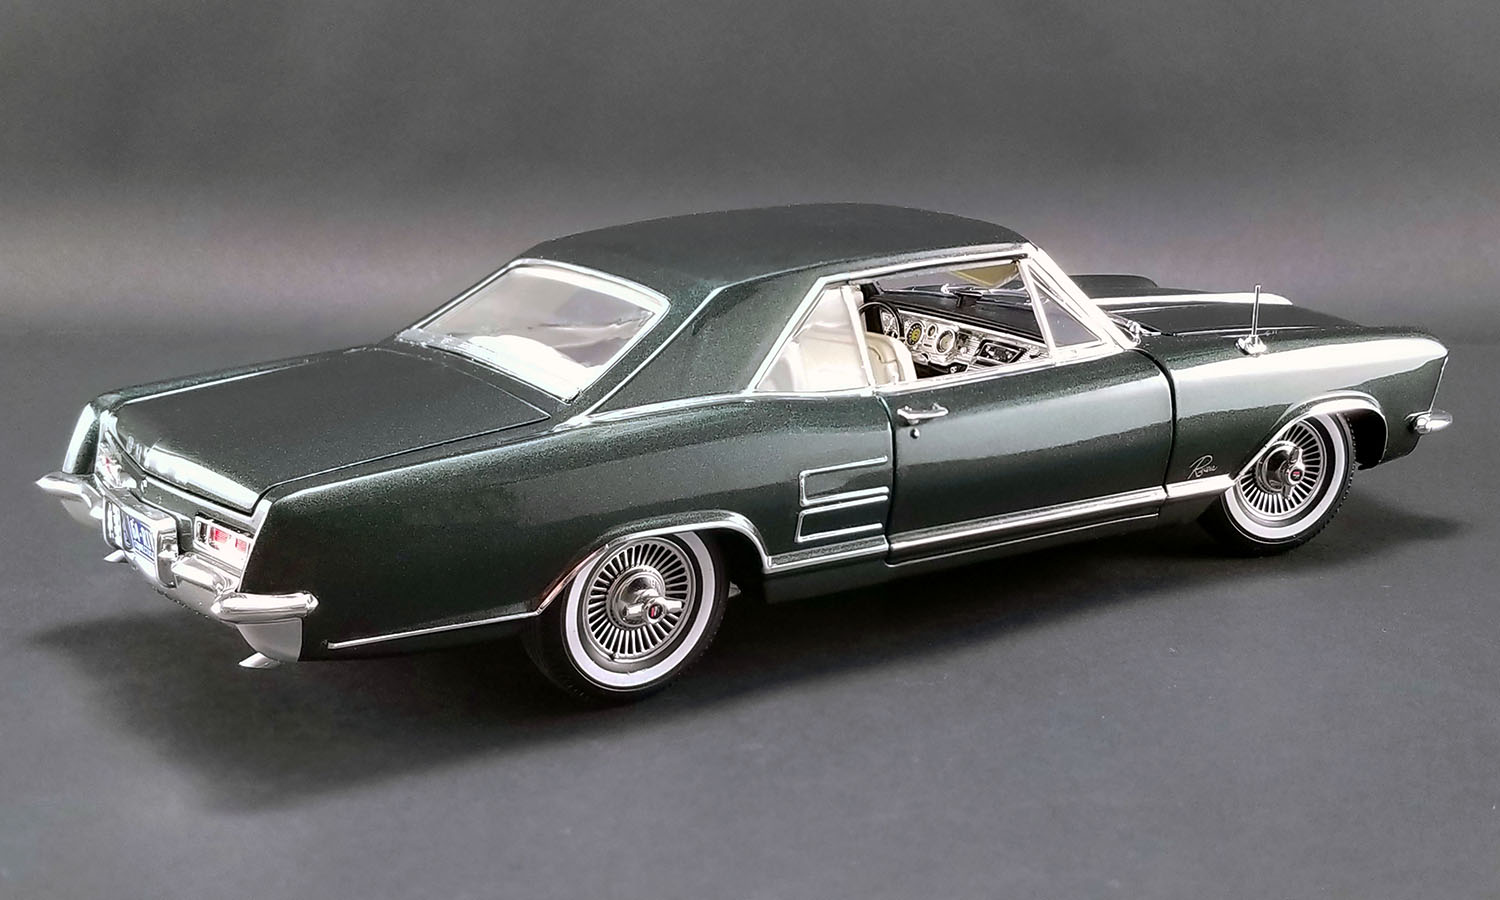 1/43 Scale Model Car American Muscle. Buick Riviera 